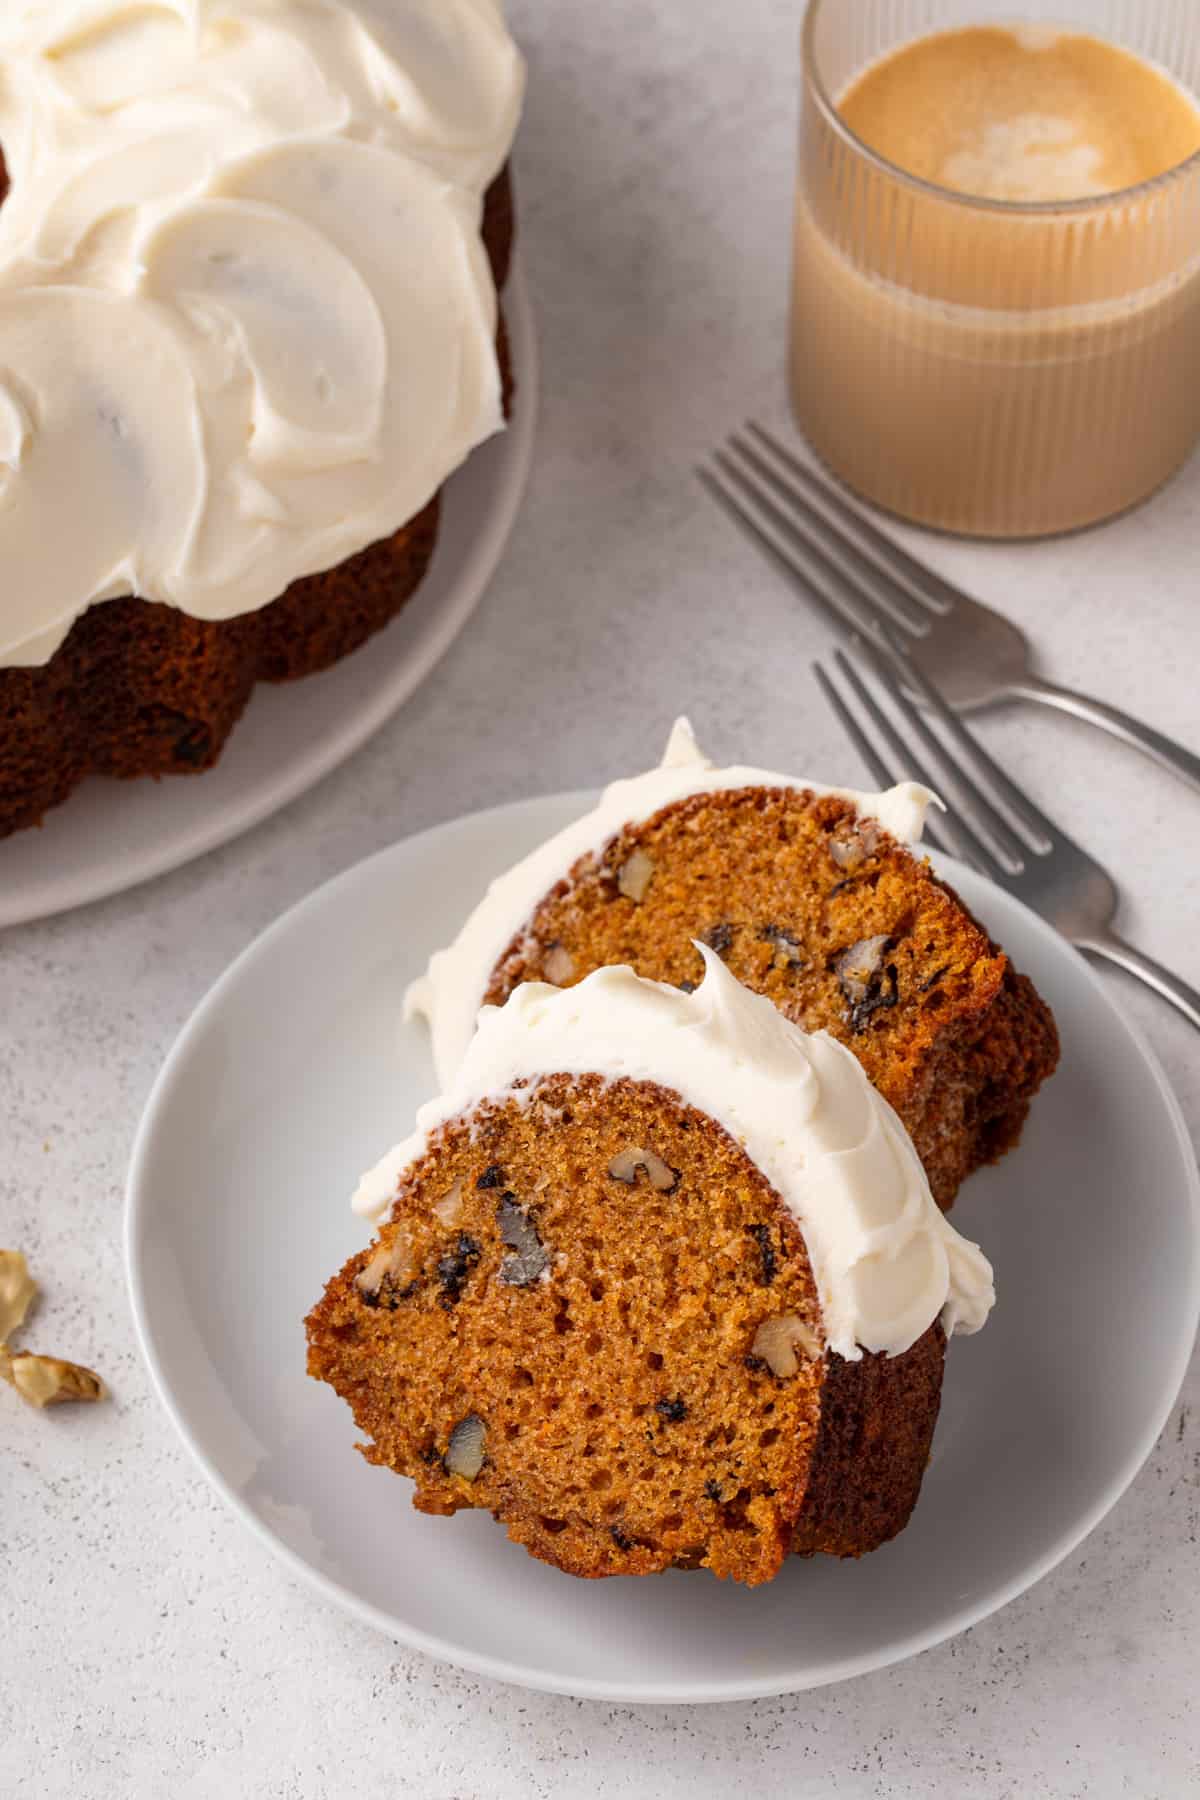 Two slices of frosted carrot bundt cake arranged on a plate.